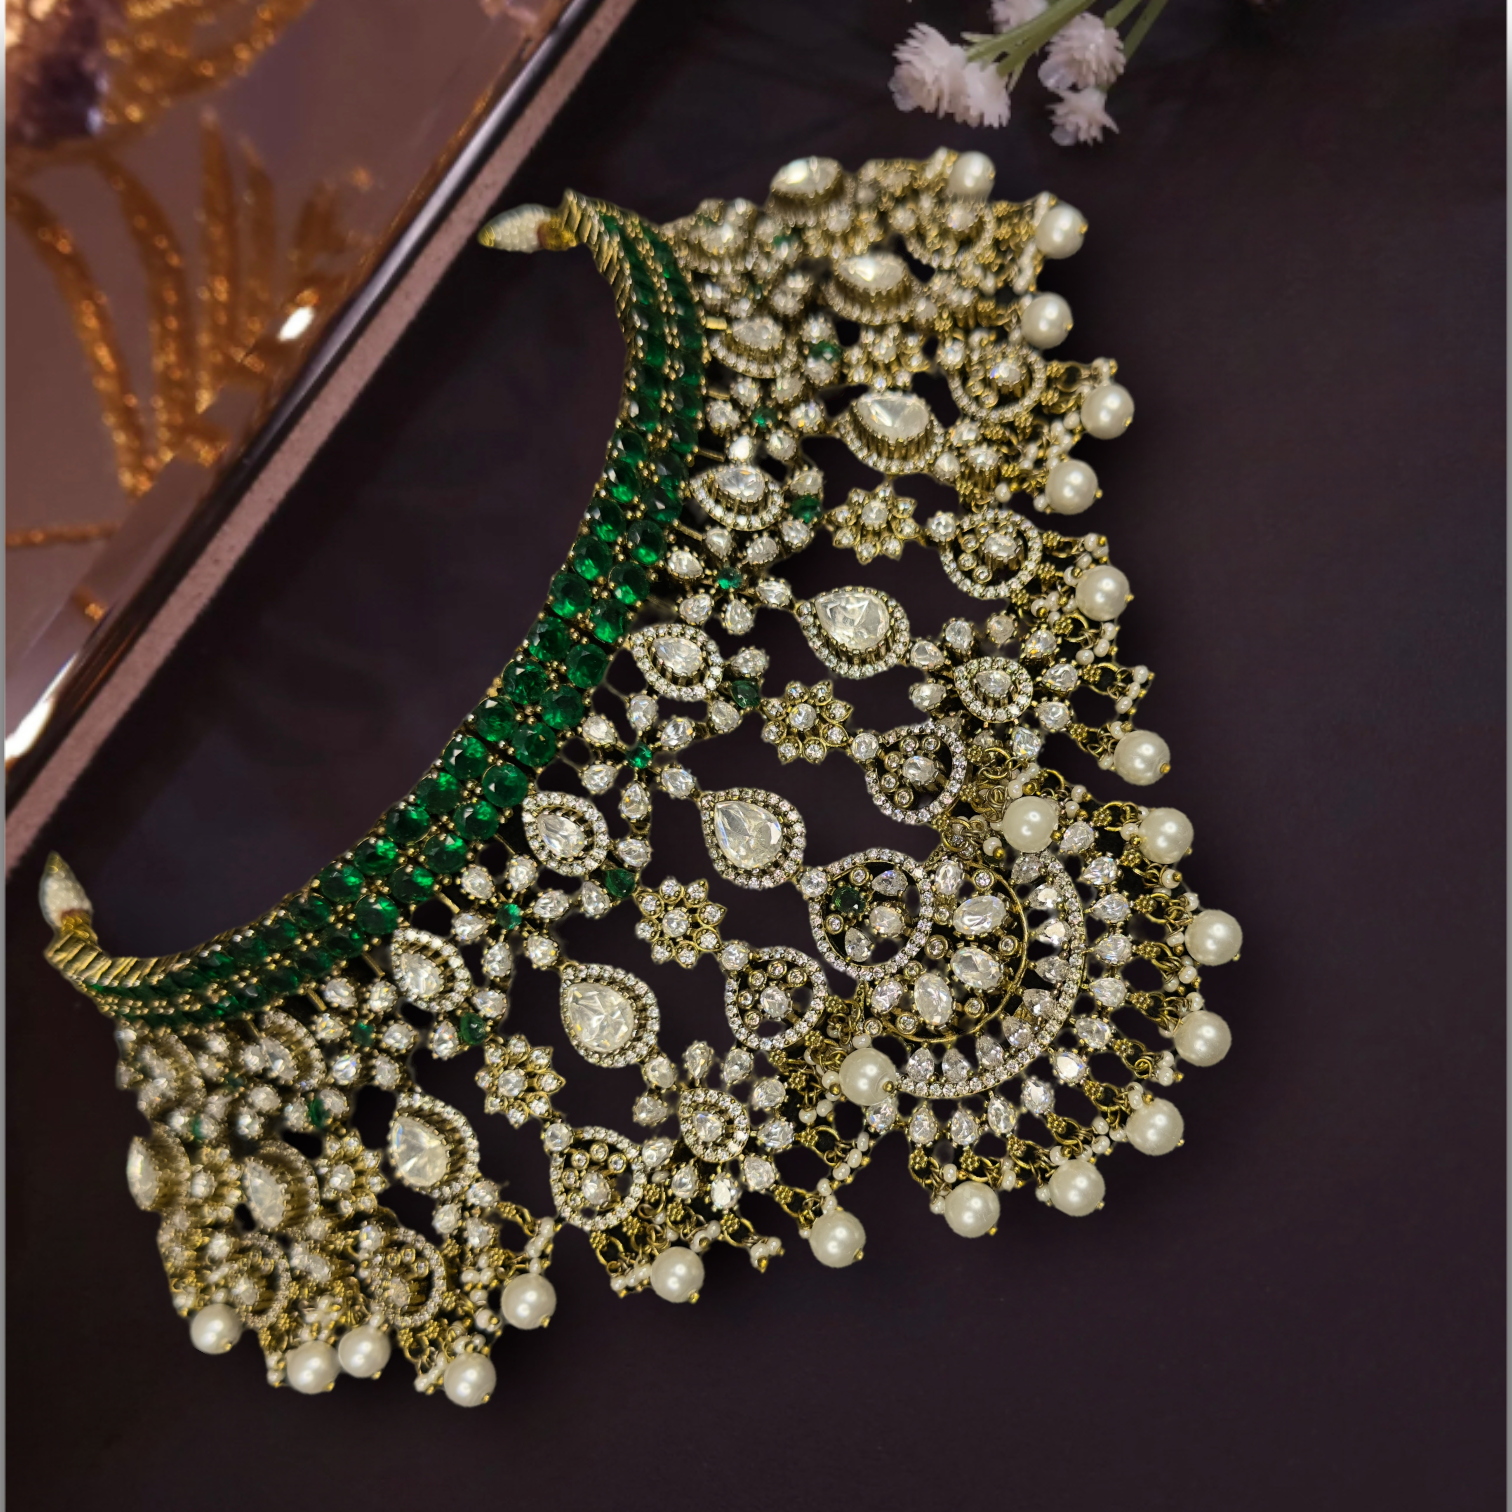 Designer Moissanite Victorian Choker Set with Maang tikka, zircon, moissanite polki stones, pearls, and beads, including matching earrings. This Victorian Jewellery is available in Red & Green colour variants. 